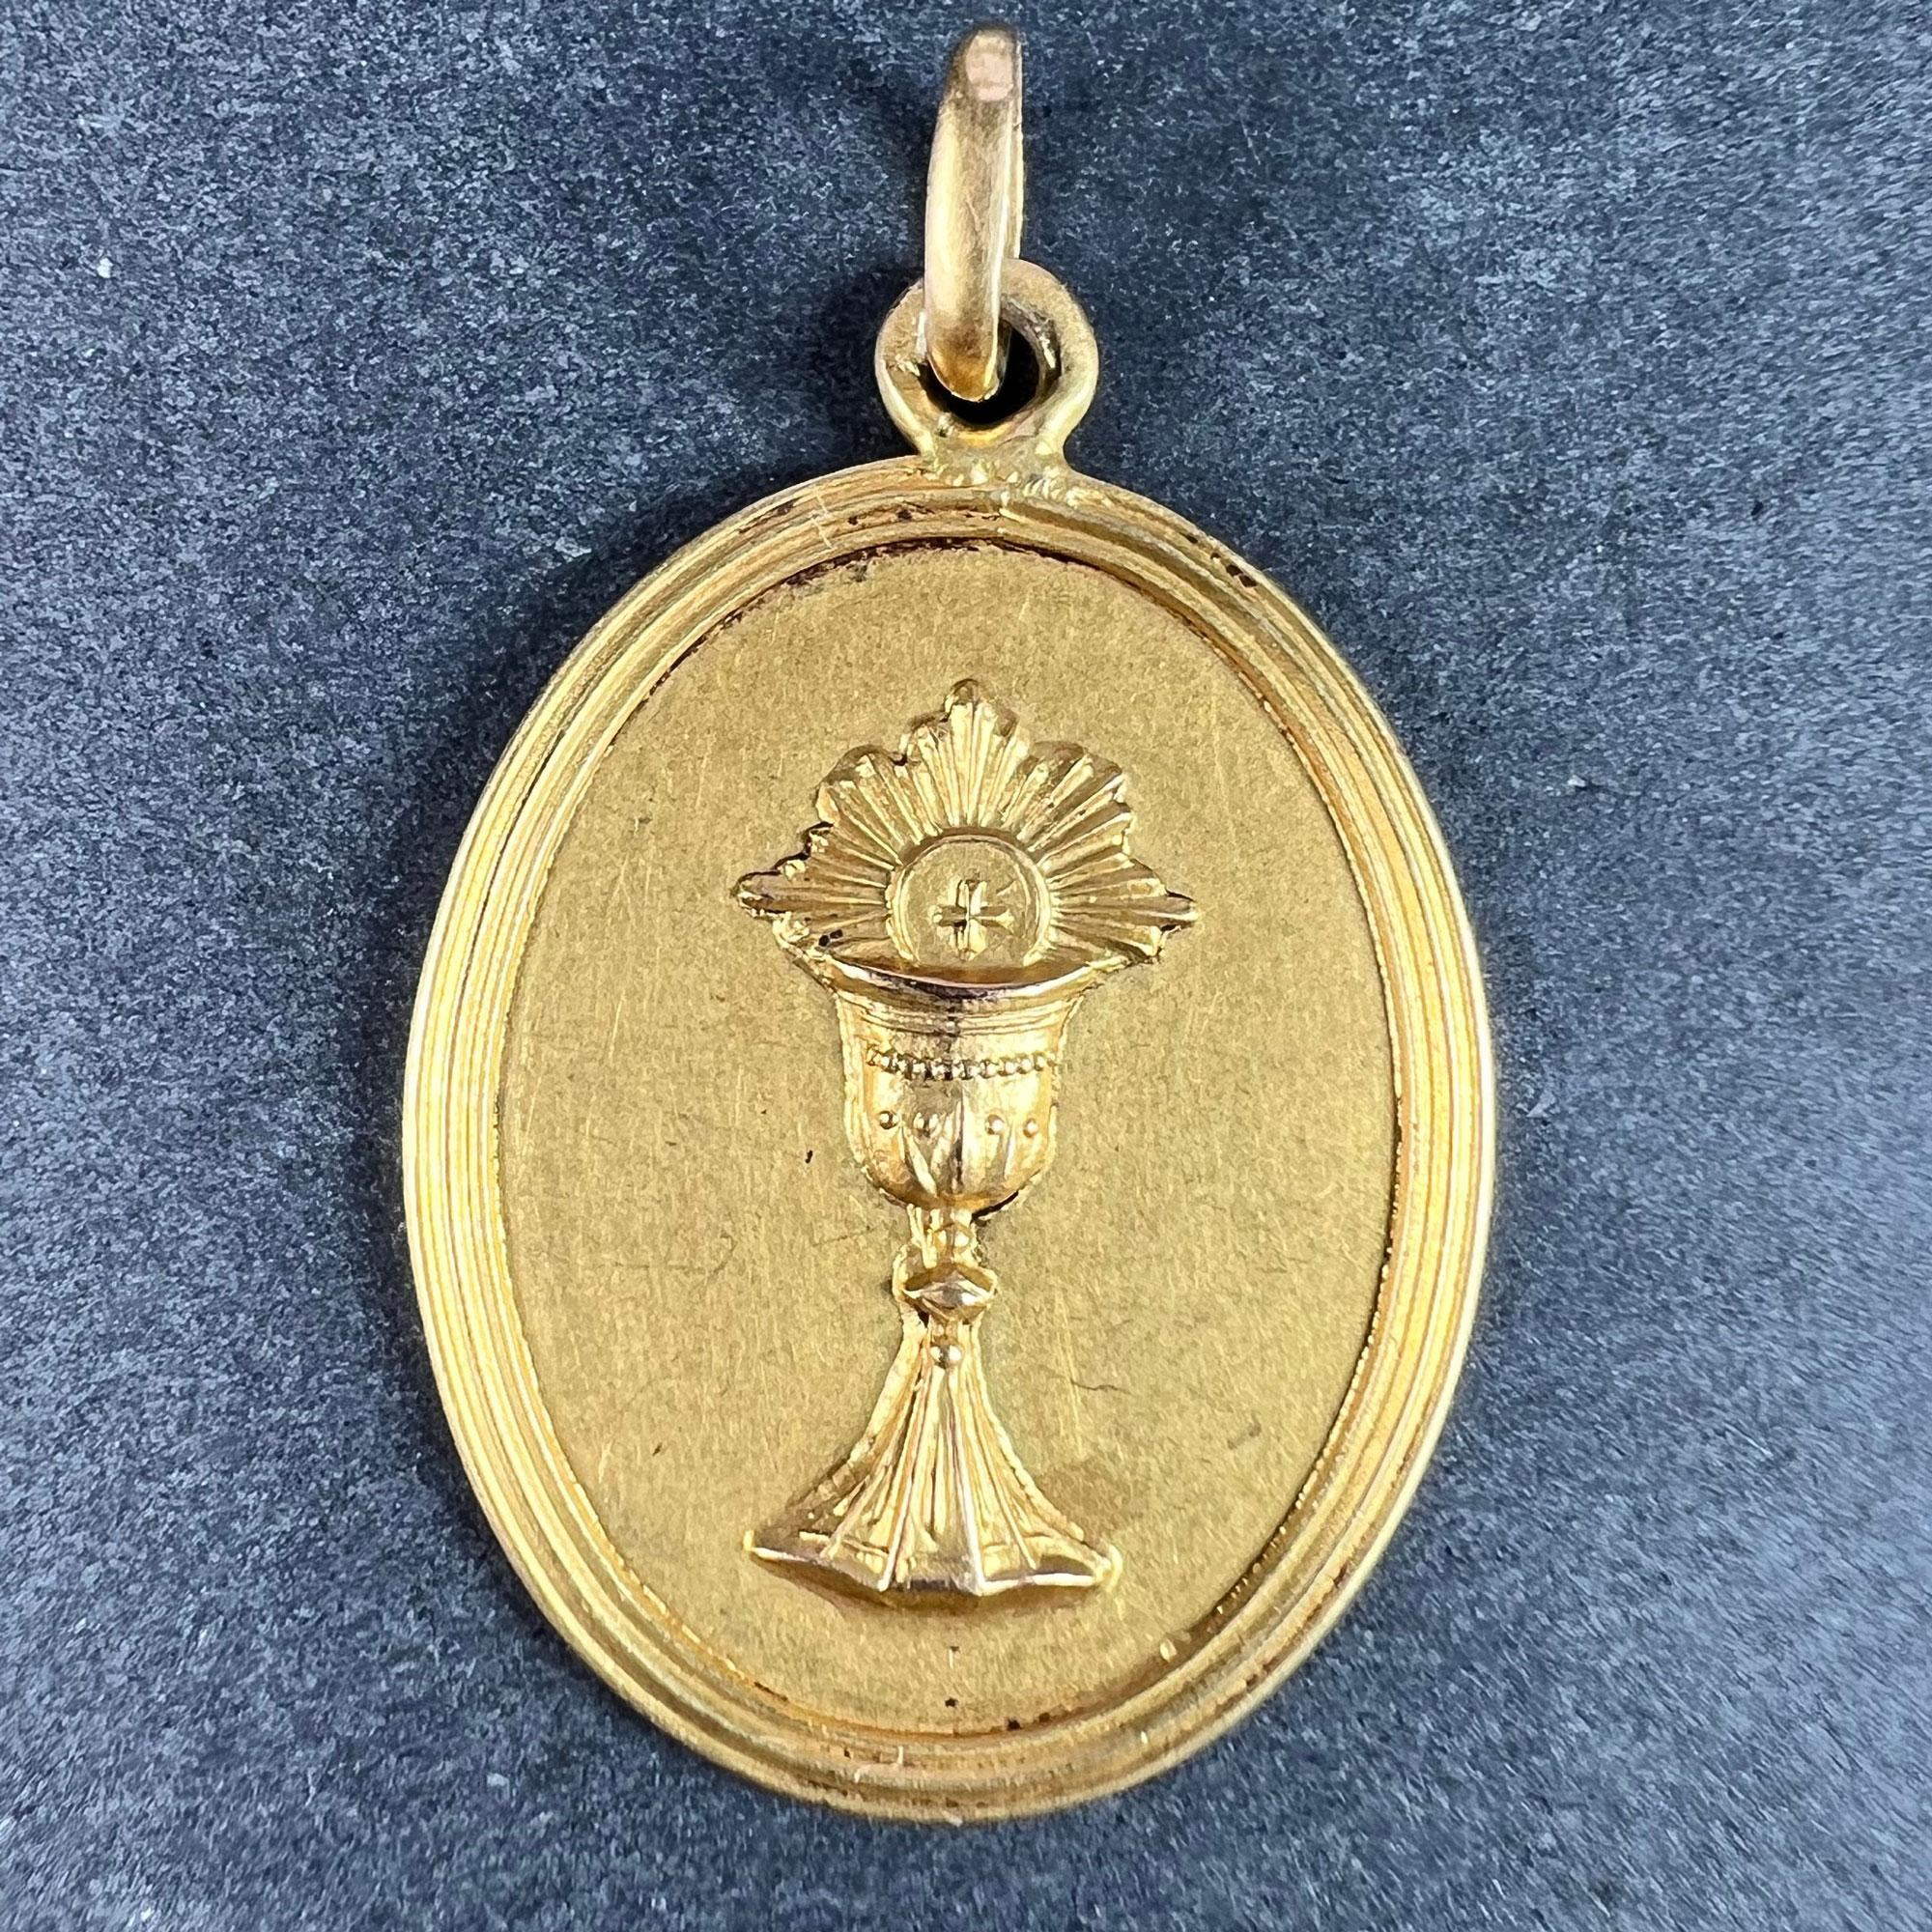 A French 18 karat (18K) yellow gold charm pendant depicting a chalice surmounted with a wafer, representing the First Communion. Engraved to the reverse with the name 'Anne-Marie Moreau' and the date 25 Mai 1941. Stamped with the eagle’s head for